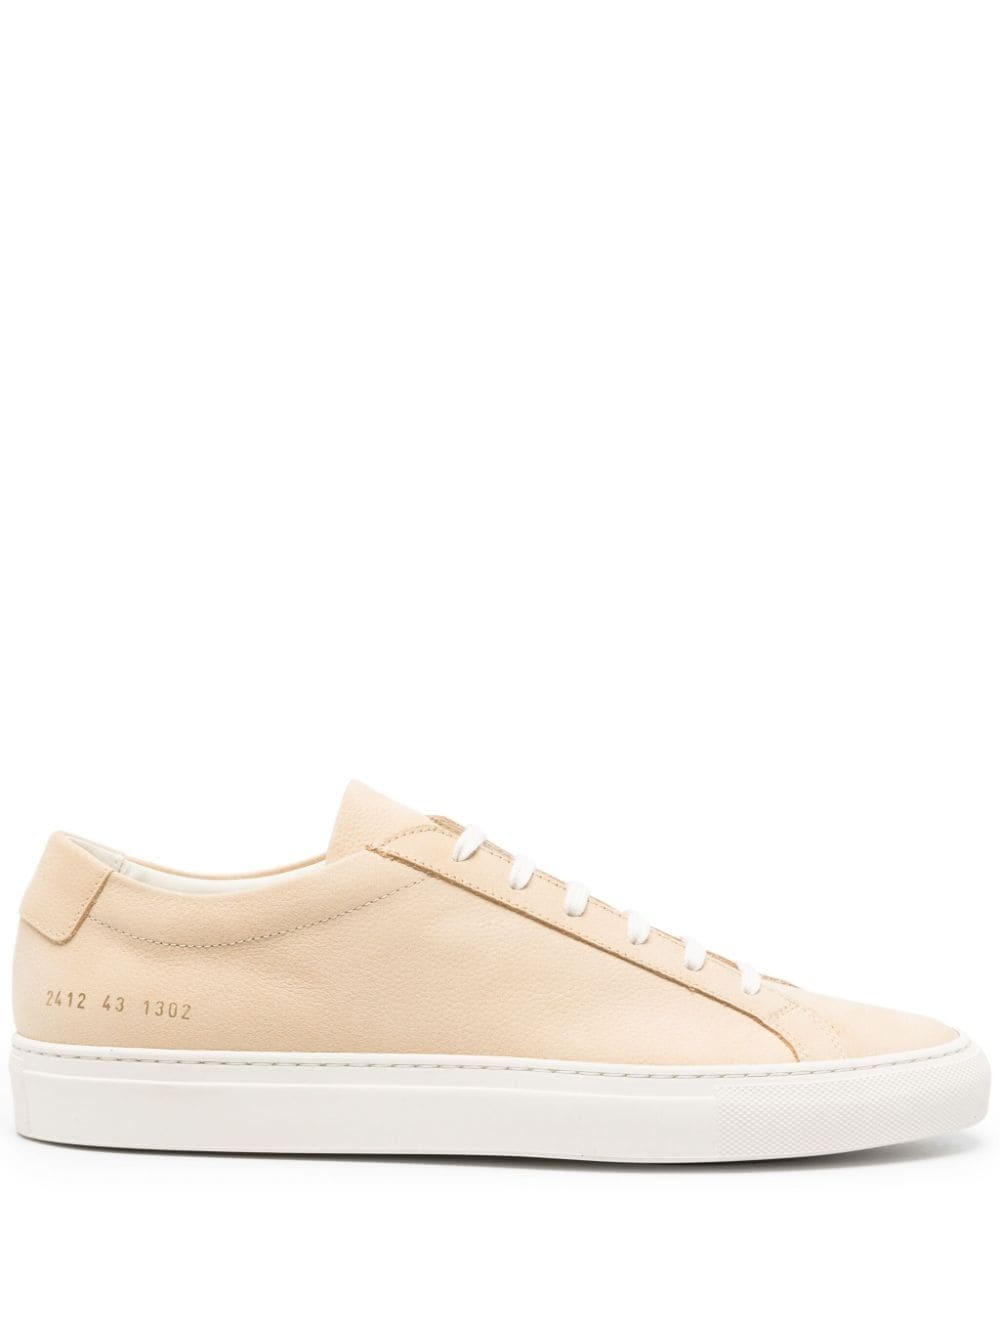 Achilles leather sneakers - 1